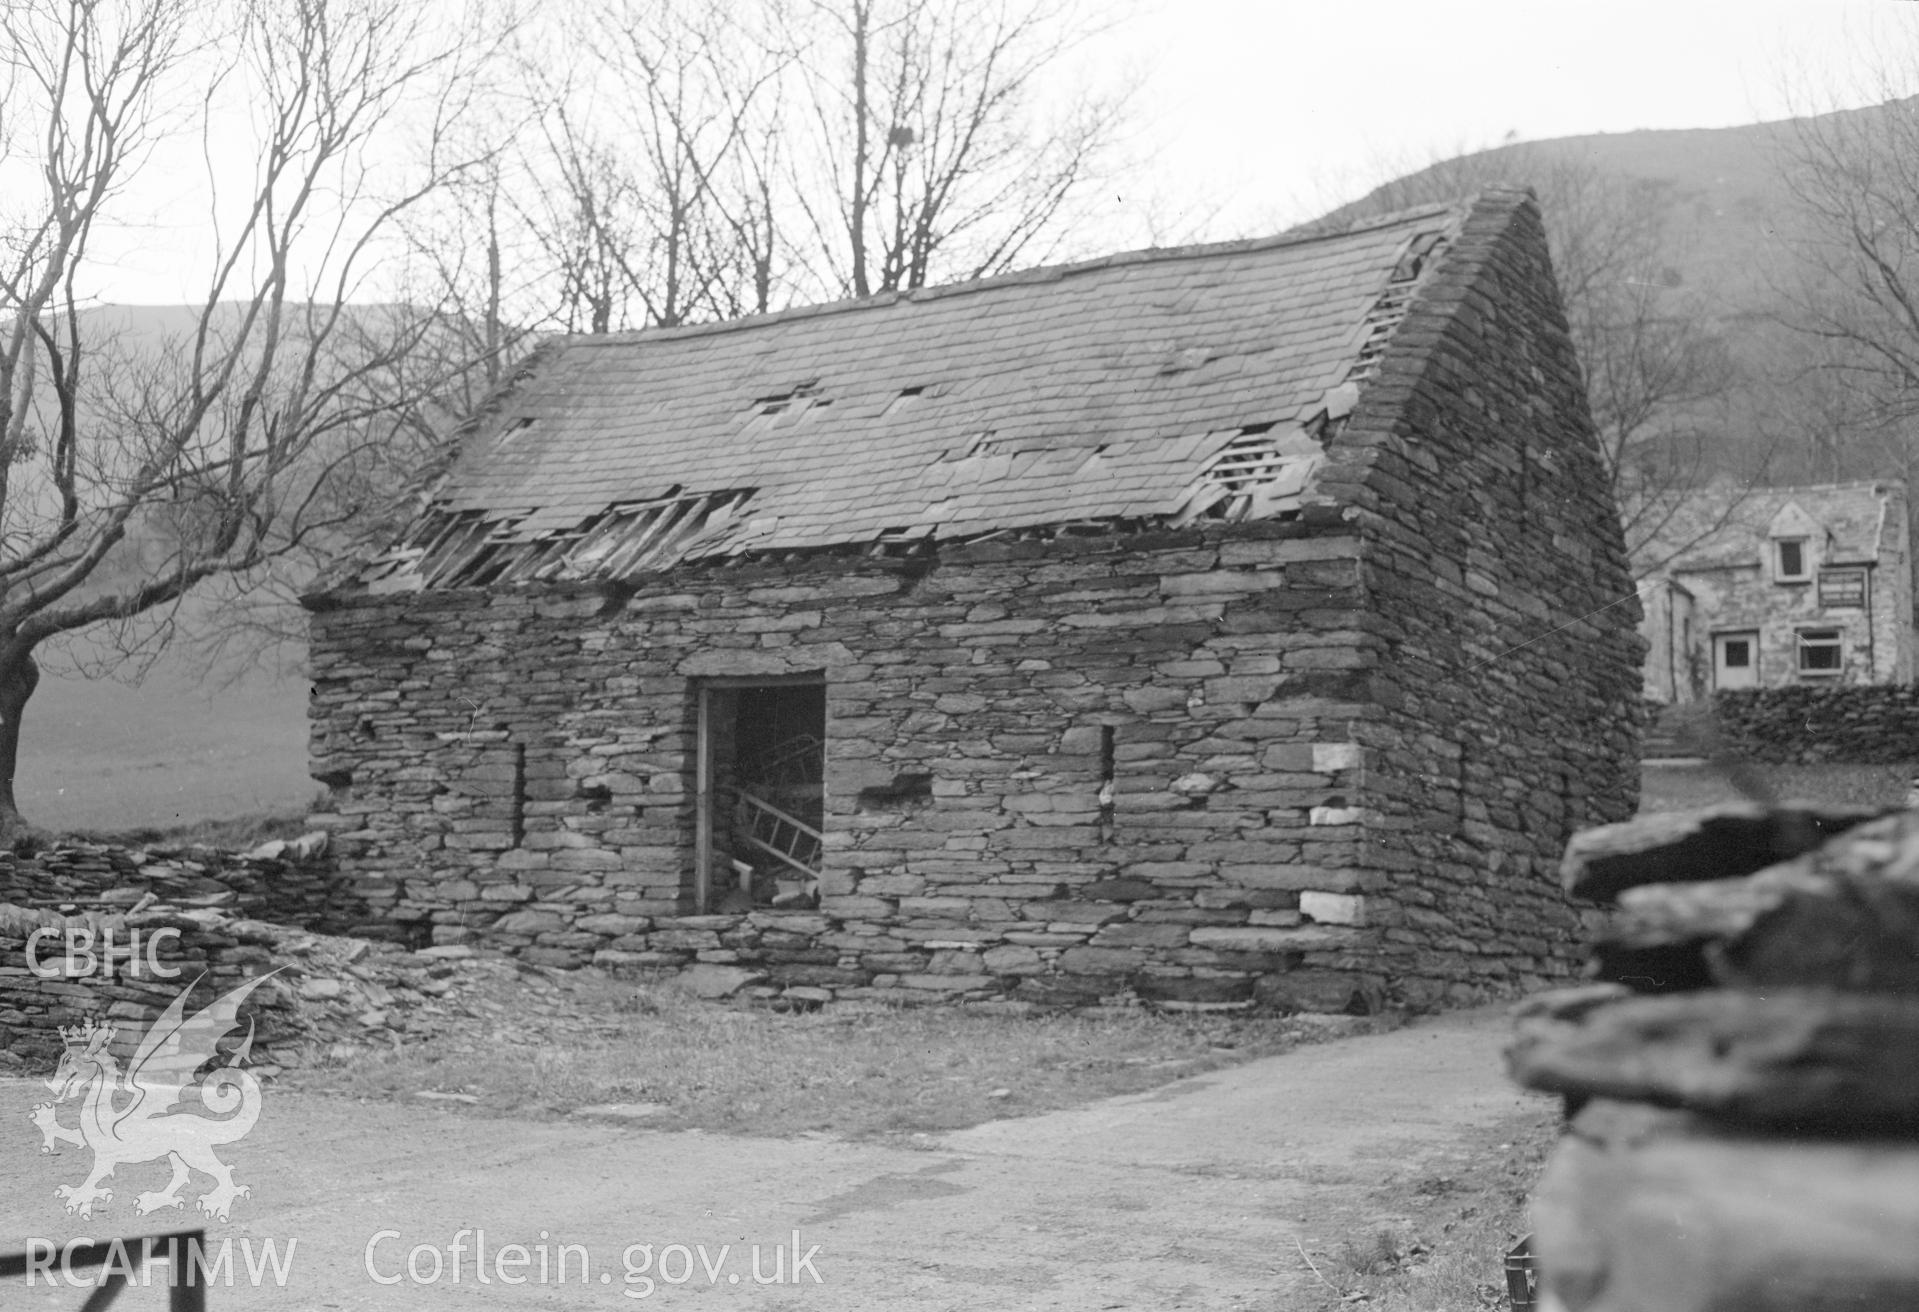 Digital copy of an black and white photograph showing an exterior view of Pen y Garreg Barn.